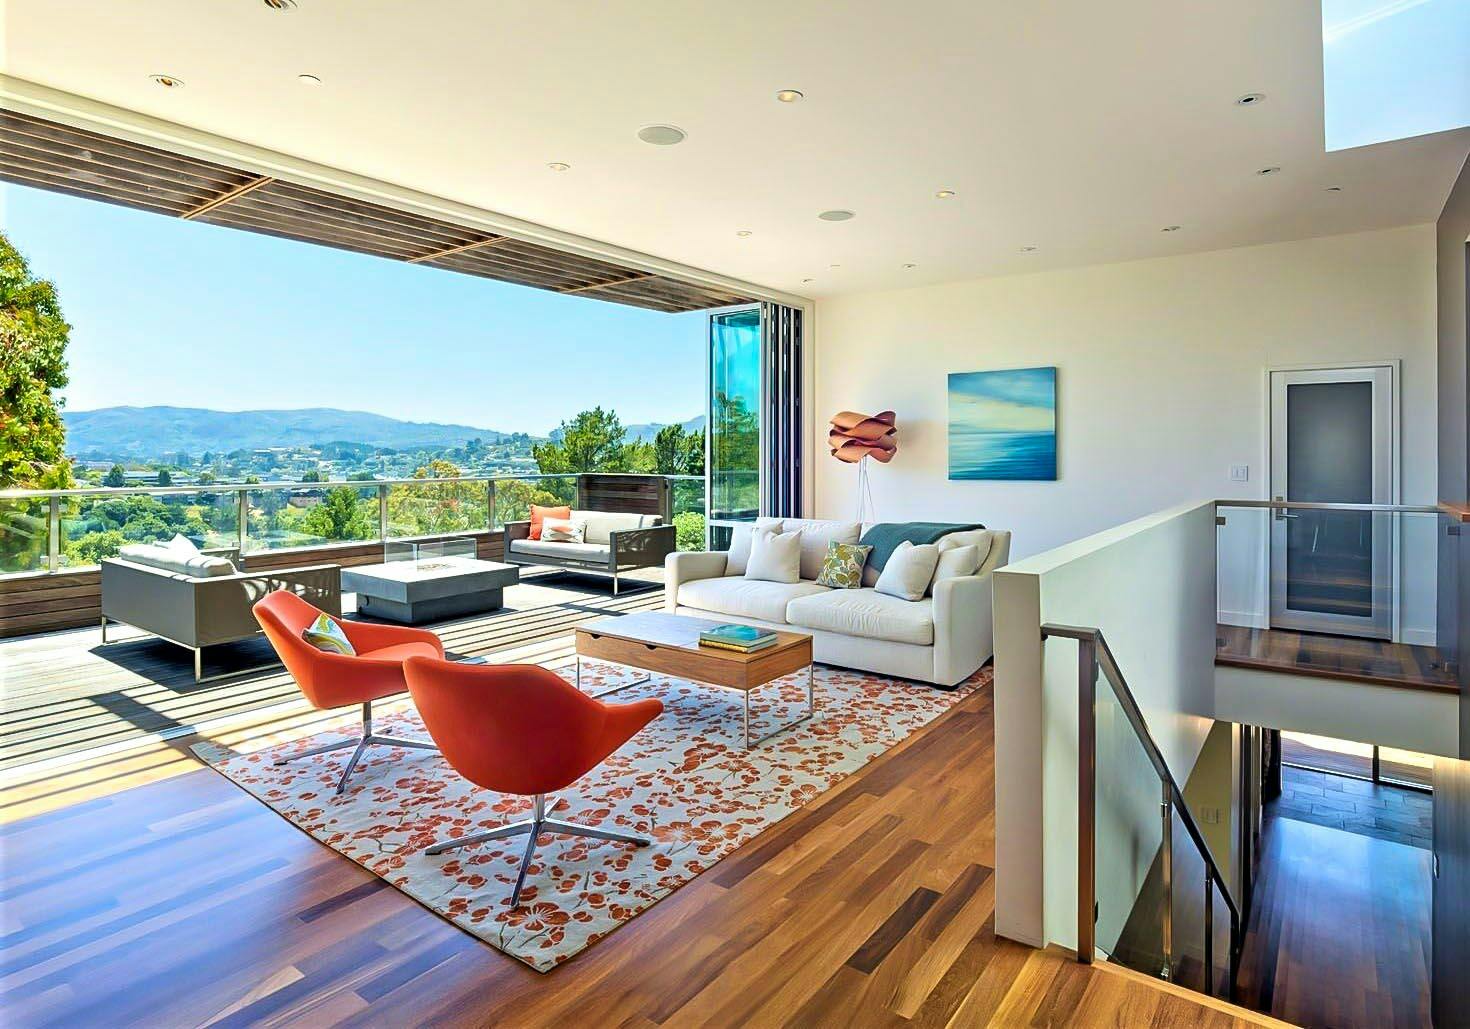 indoor/outdoor living achieved in hillside home with folding glass wall in living room remodel